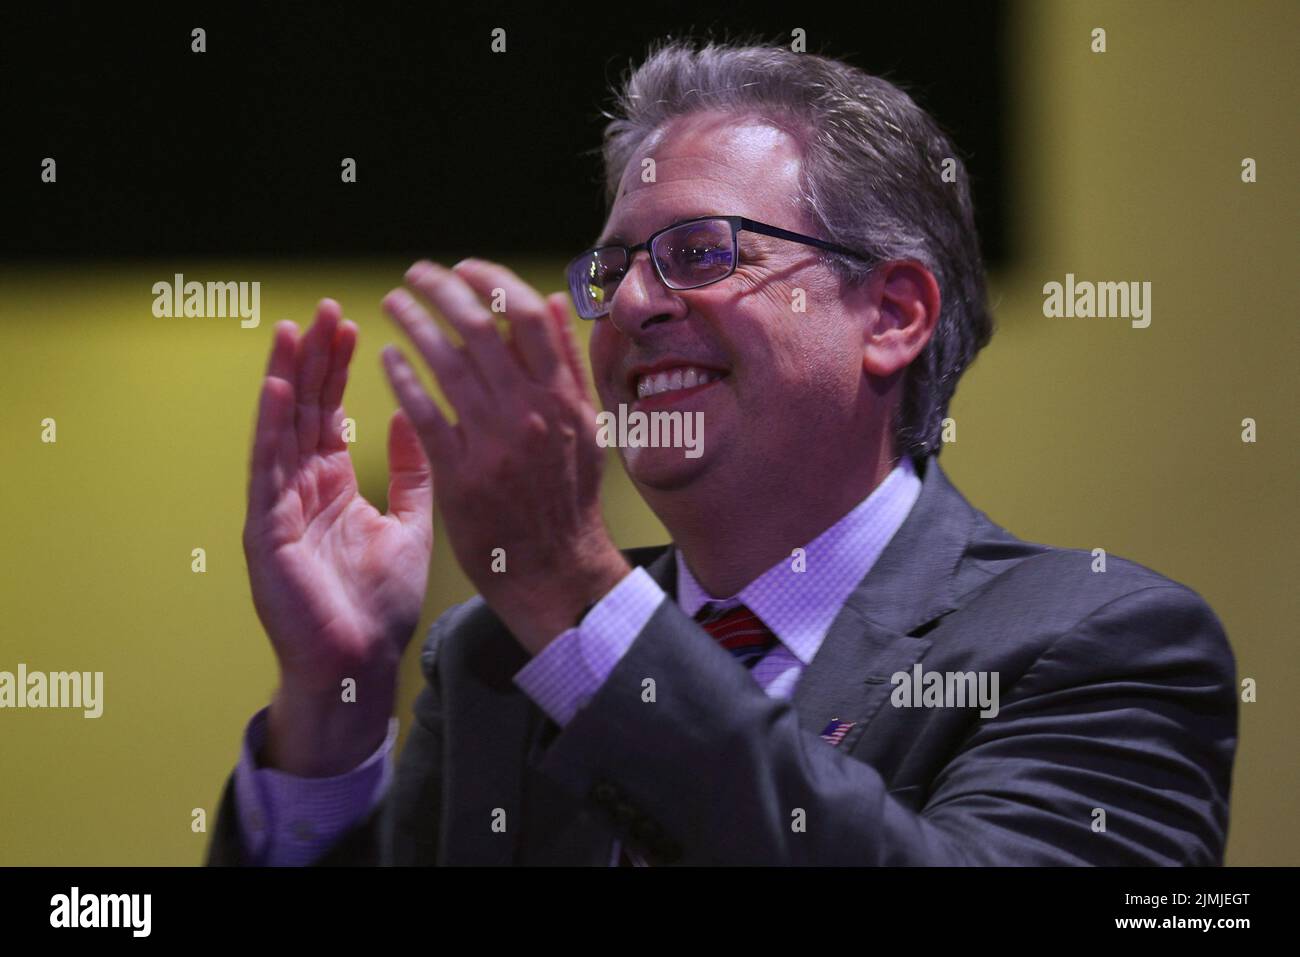 Republican candidate for Attorney General of Michigan Matthew DePerno reacts as he is recognized by former U.S. President Donald Trump at the Conservative Political Action Conference (CPAC) in Dallas, Texas, U.S., August 6, 2022.  REUTERS/Brian Snyder Stock Photo